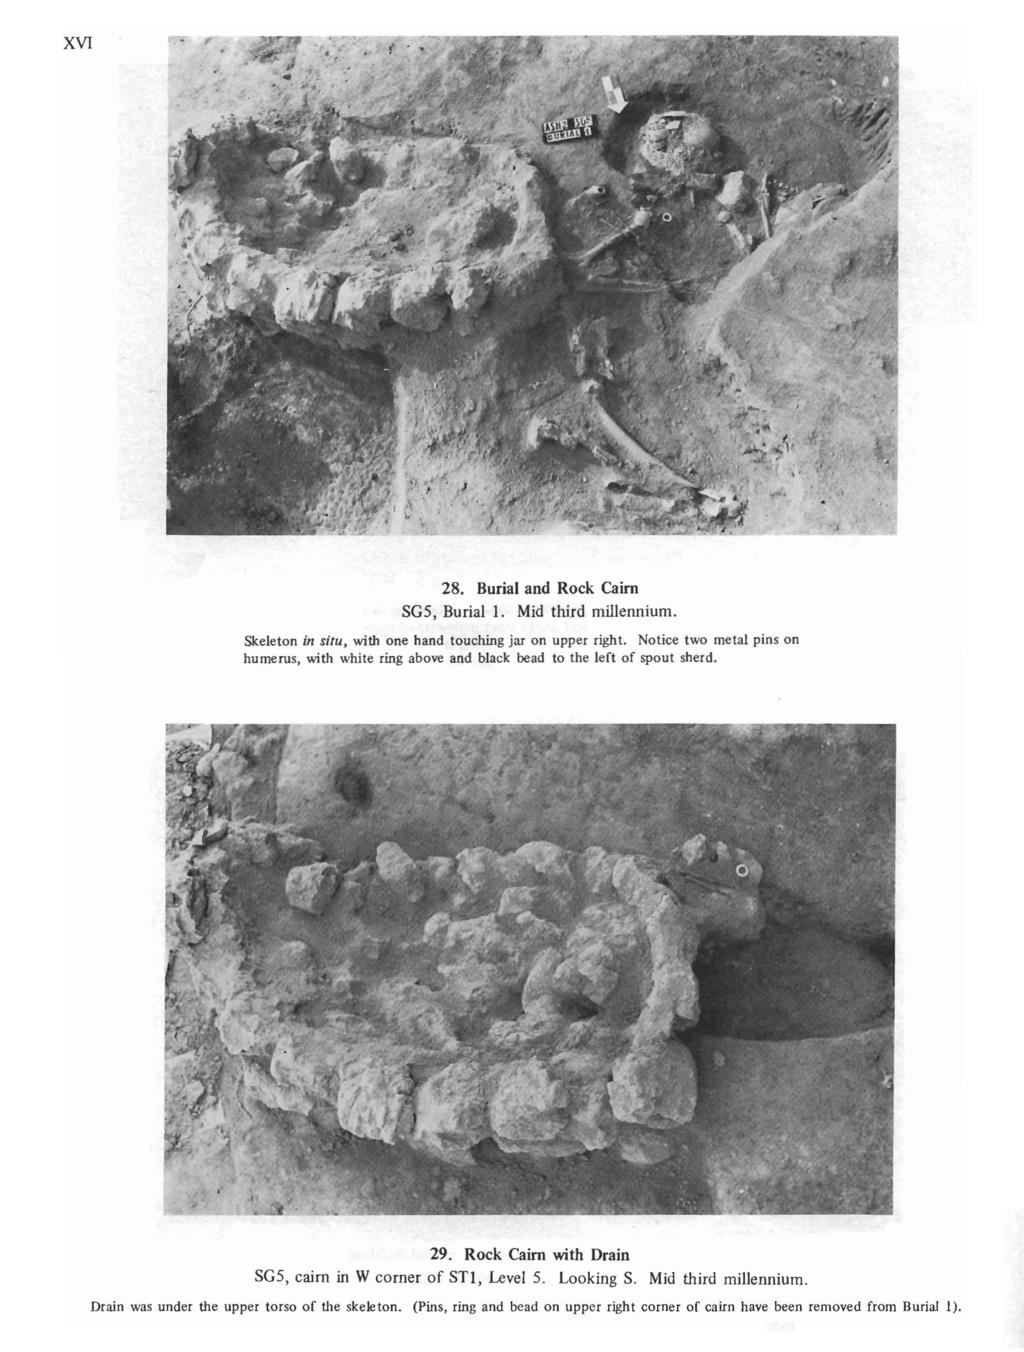 XVI 28. Burial and Rock Cairn SG5, Burial 1. Mid third millennium. Skeleton in situ, with one hand touching jar on upper right.